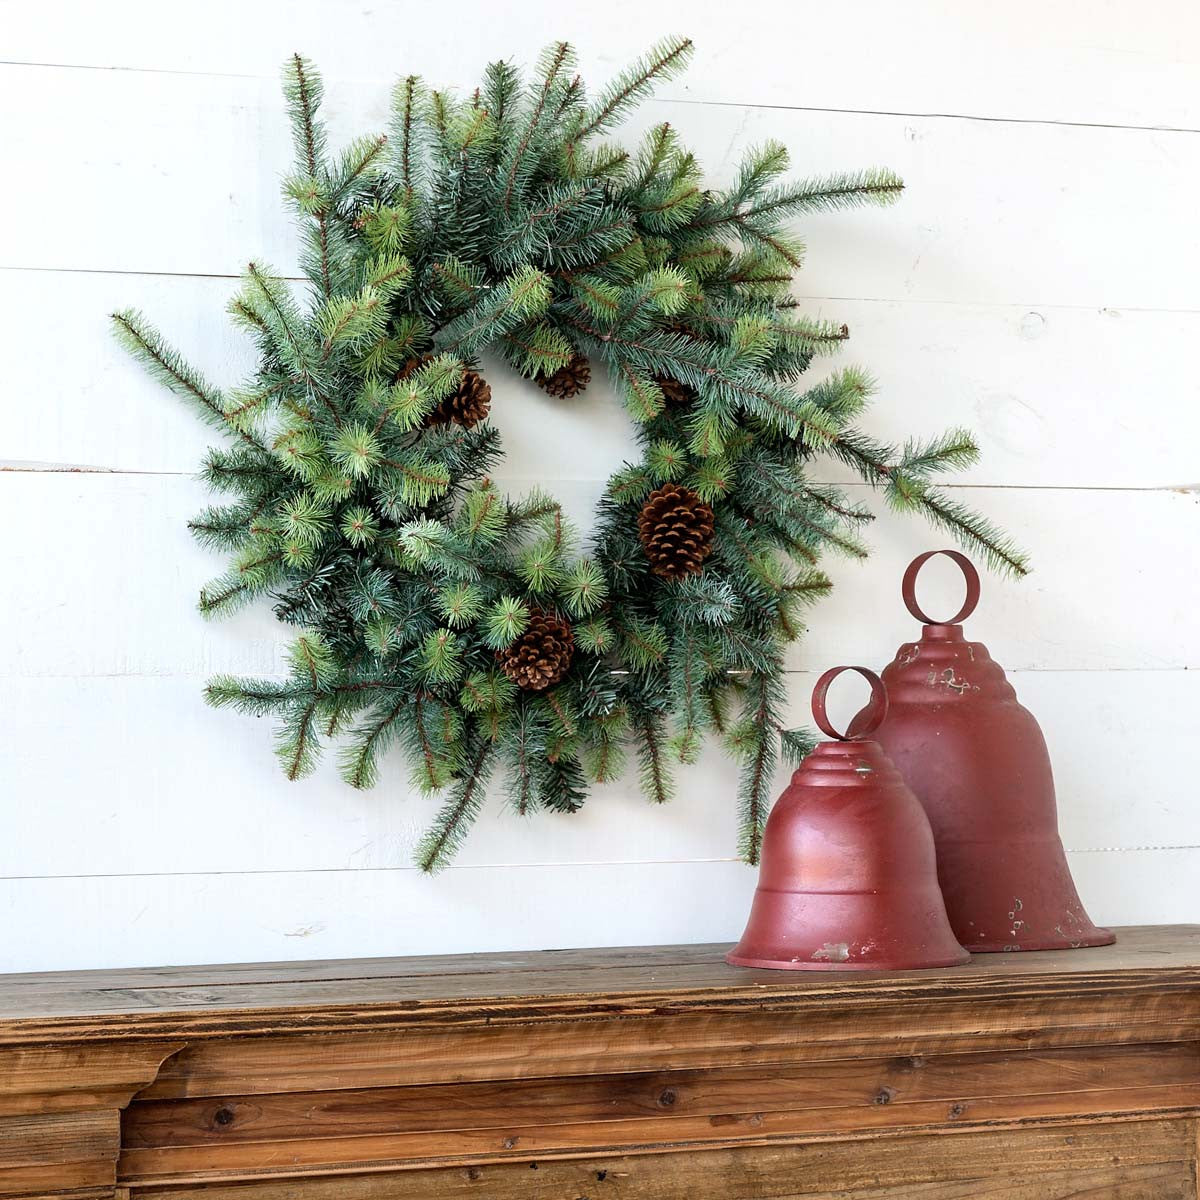 Blue Spruce Wreath with LED Lights, Large